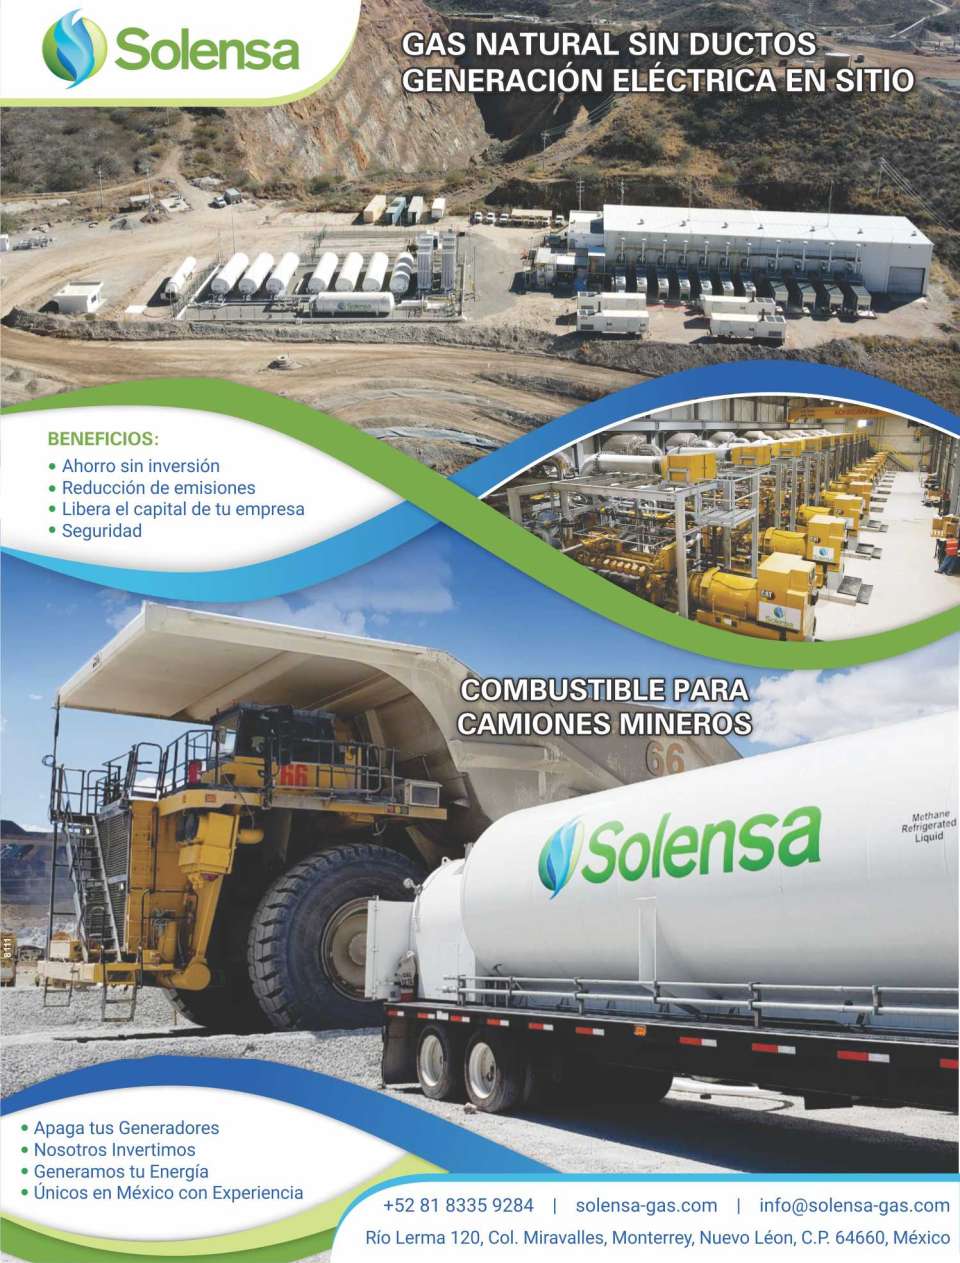 Natural Gas PIPELESS, Electric generation on site. Fuel for Mining Trucks. Benefits: Savings without investment, Reduction of emissions, Release the capital of your company, Security.